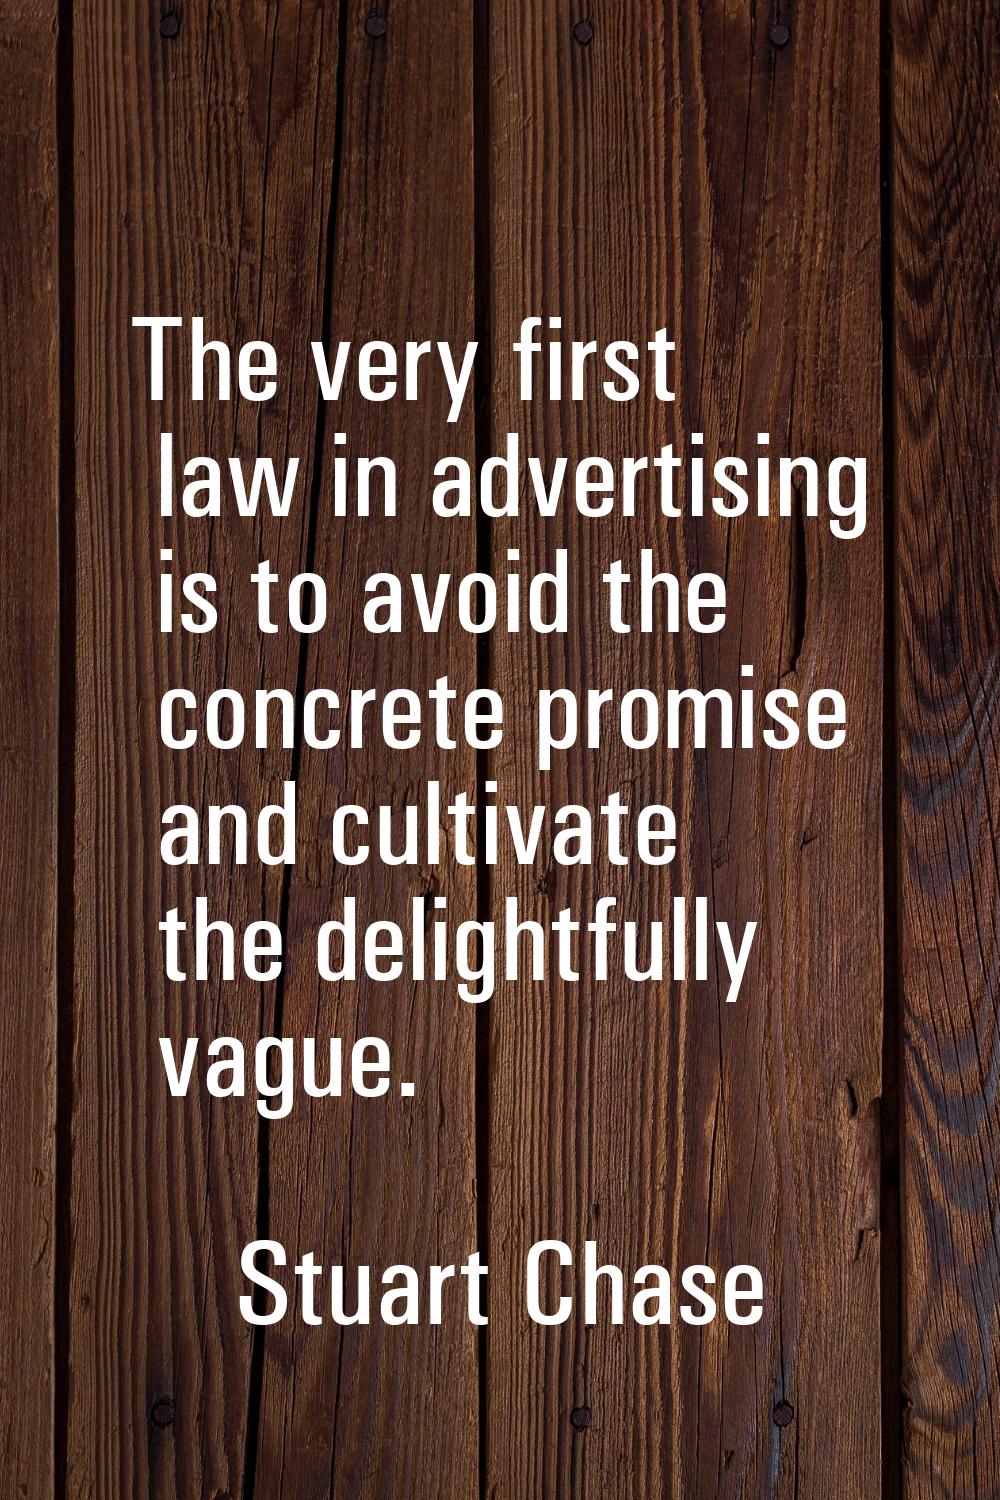 The very first law in advertising is to avoid the concrete promise and cultivate the delightfully v